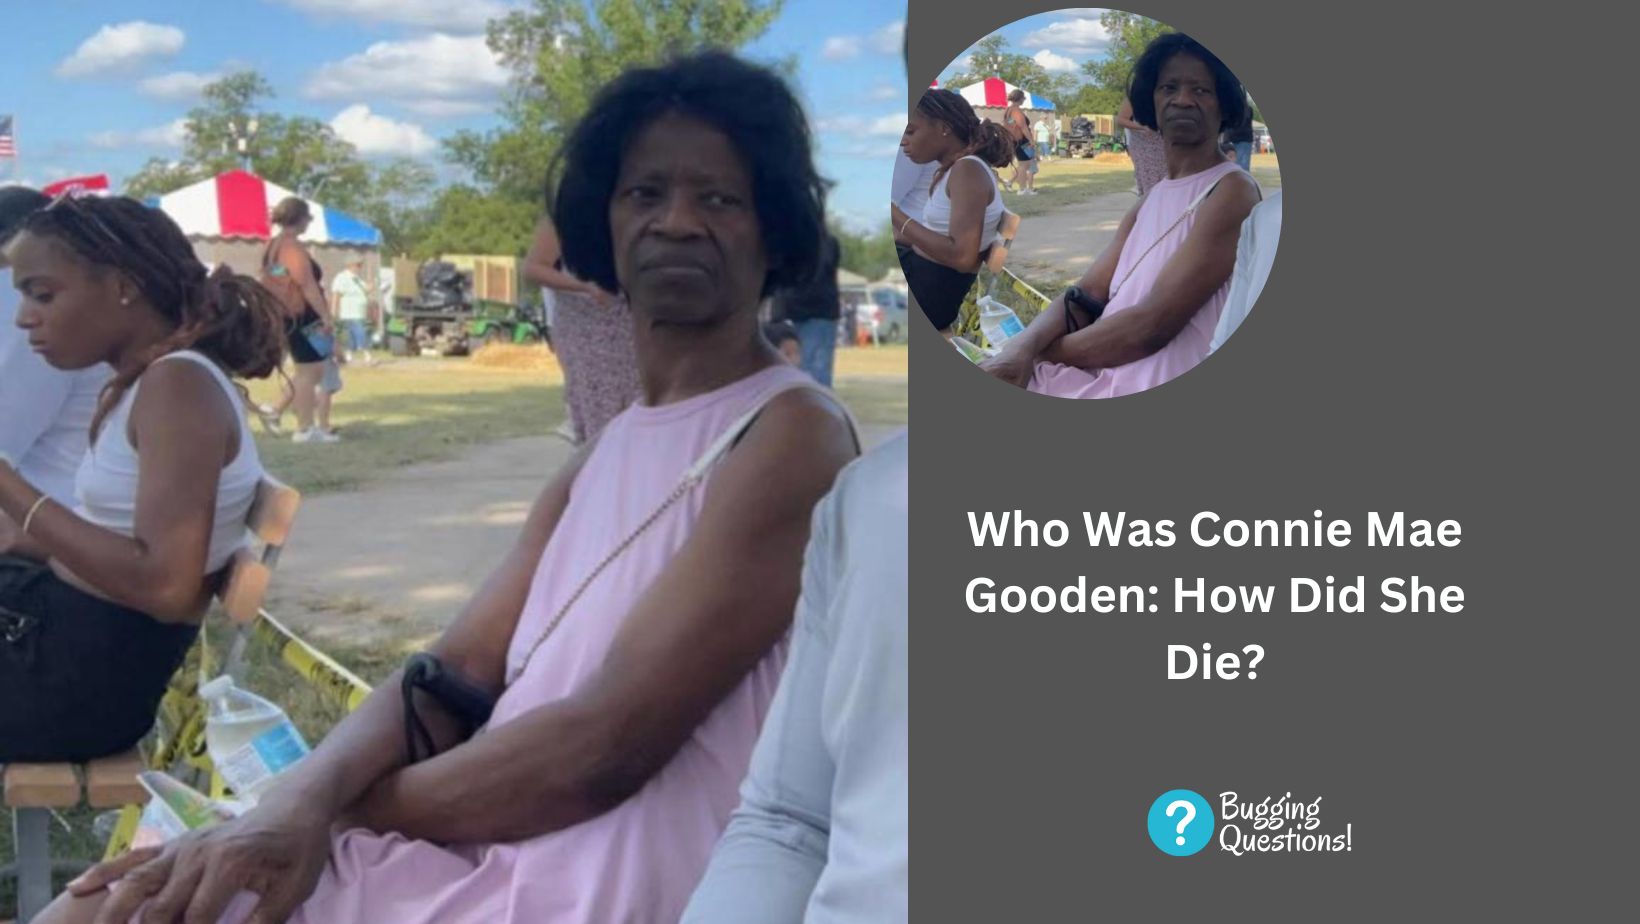 Who Was Connie Mae Gooden: How Did She Die?